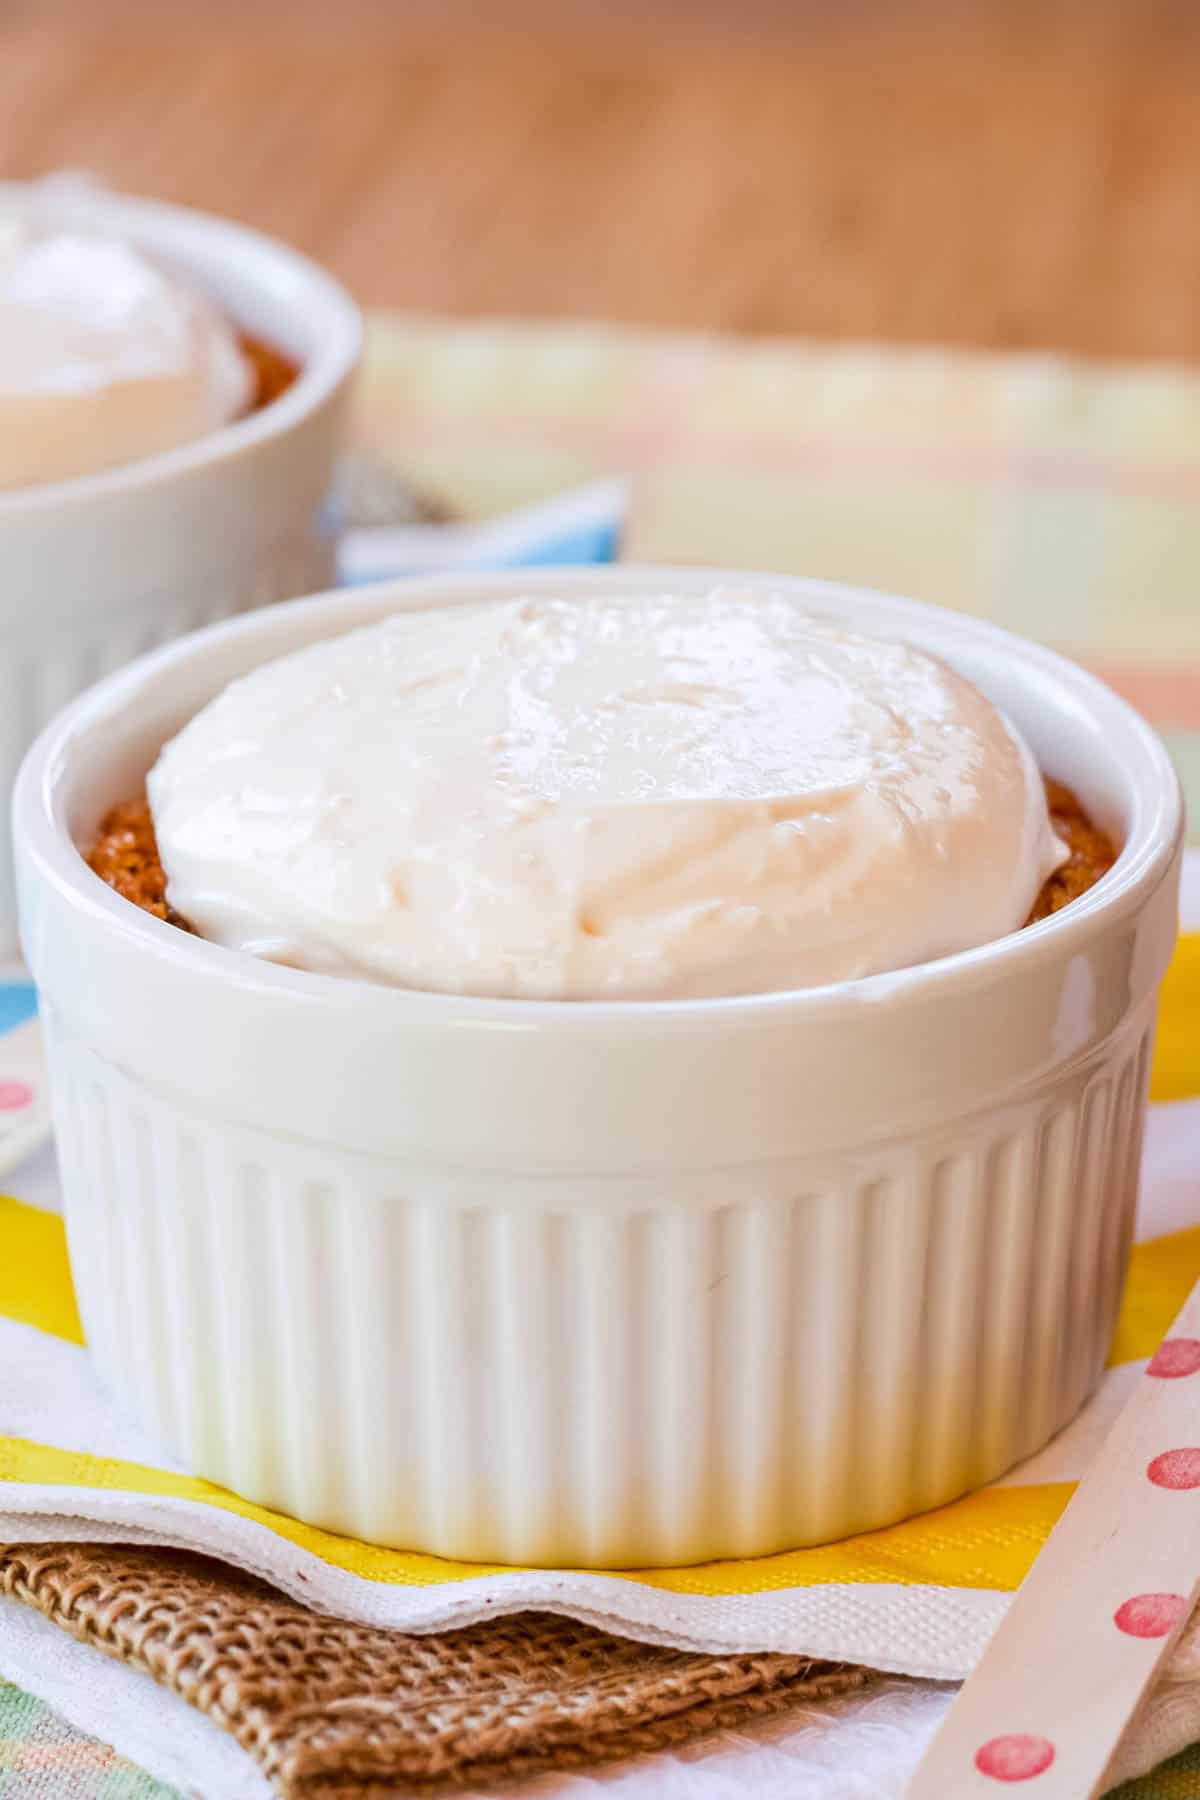 Gluten free carrot cake with cream cheese topping in a white ramekin on top of a stacked white cloth napkin, piece of burlap, and white and yellow striped paper napkin.